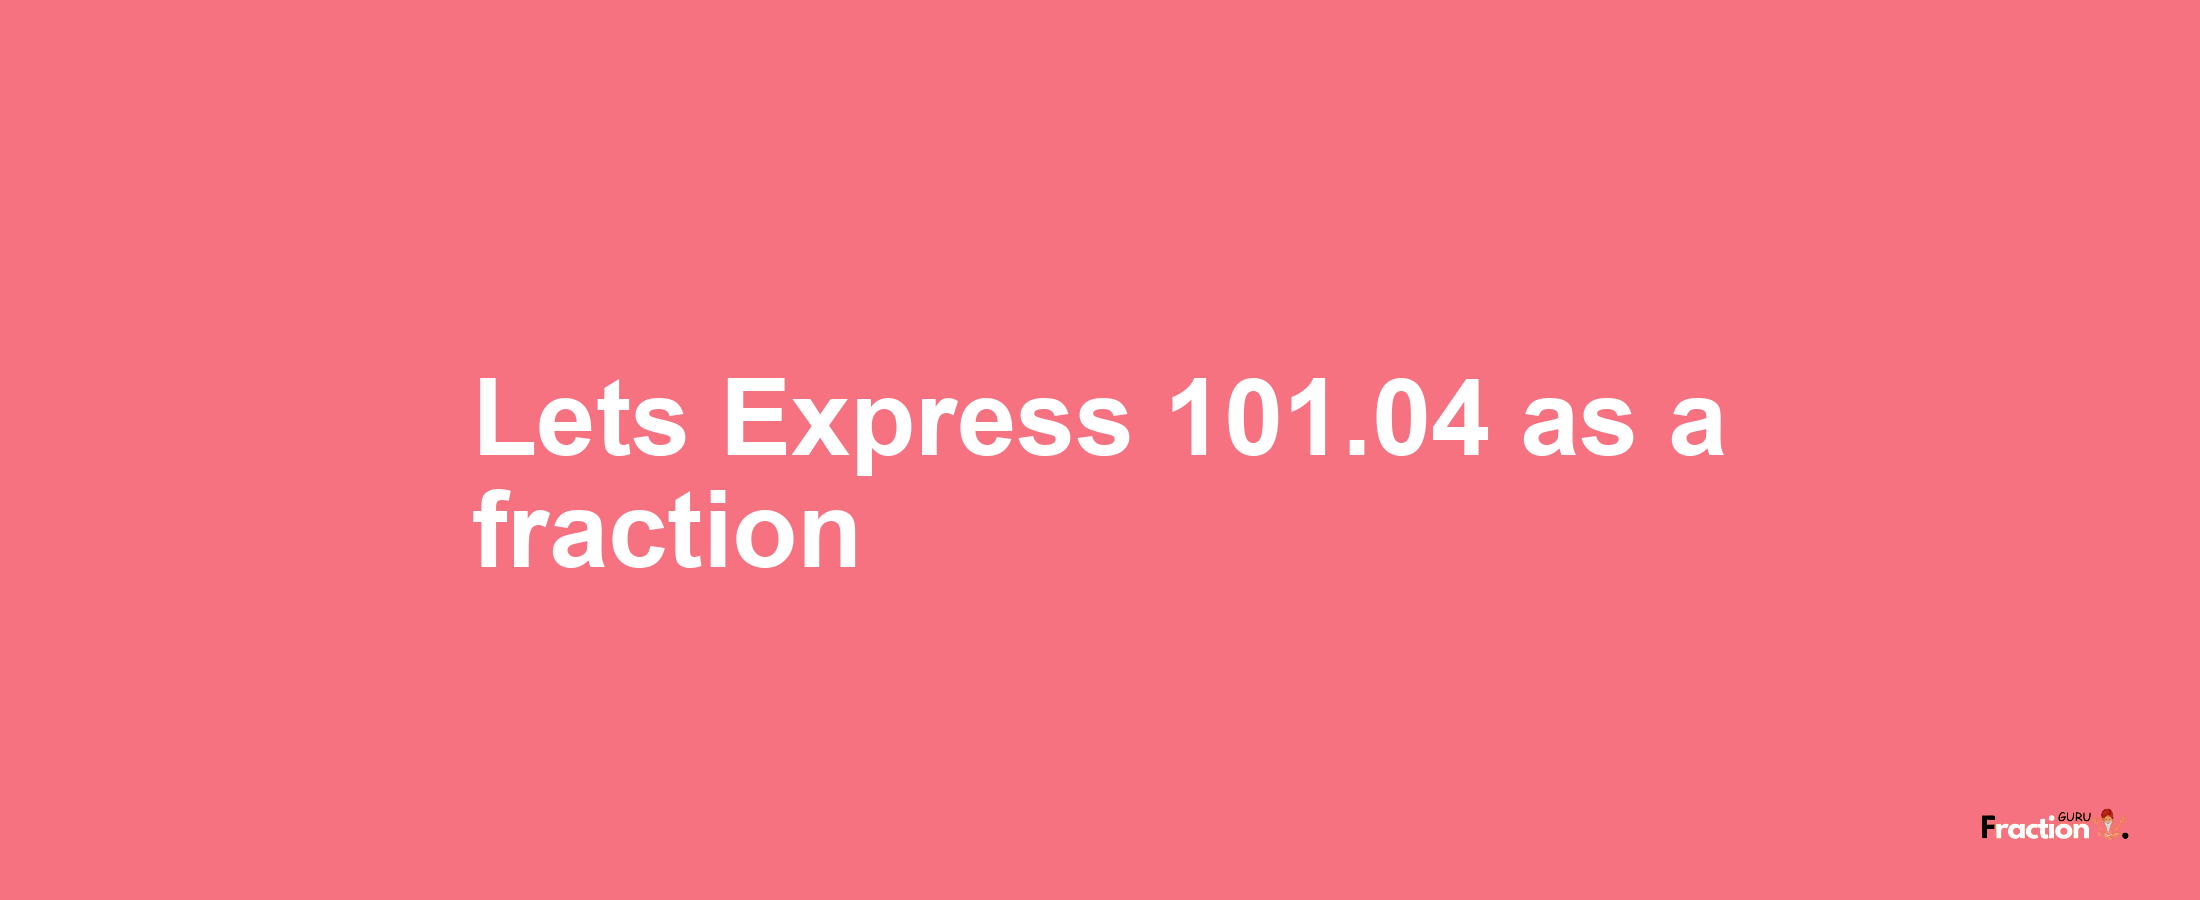 Lets Express 101.04 as afraction